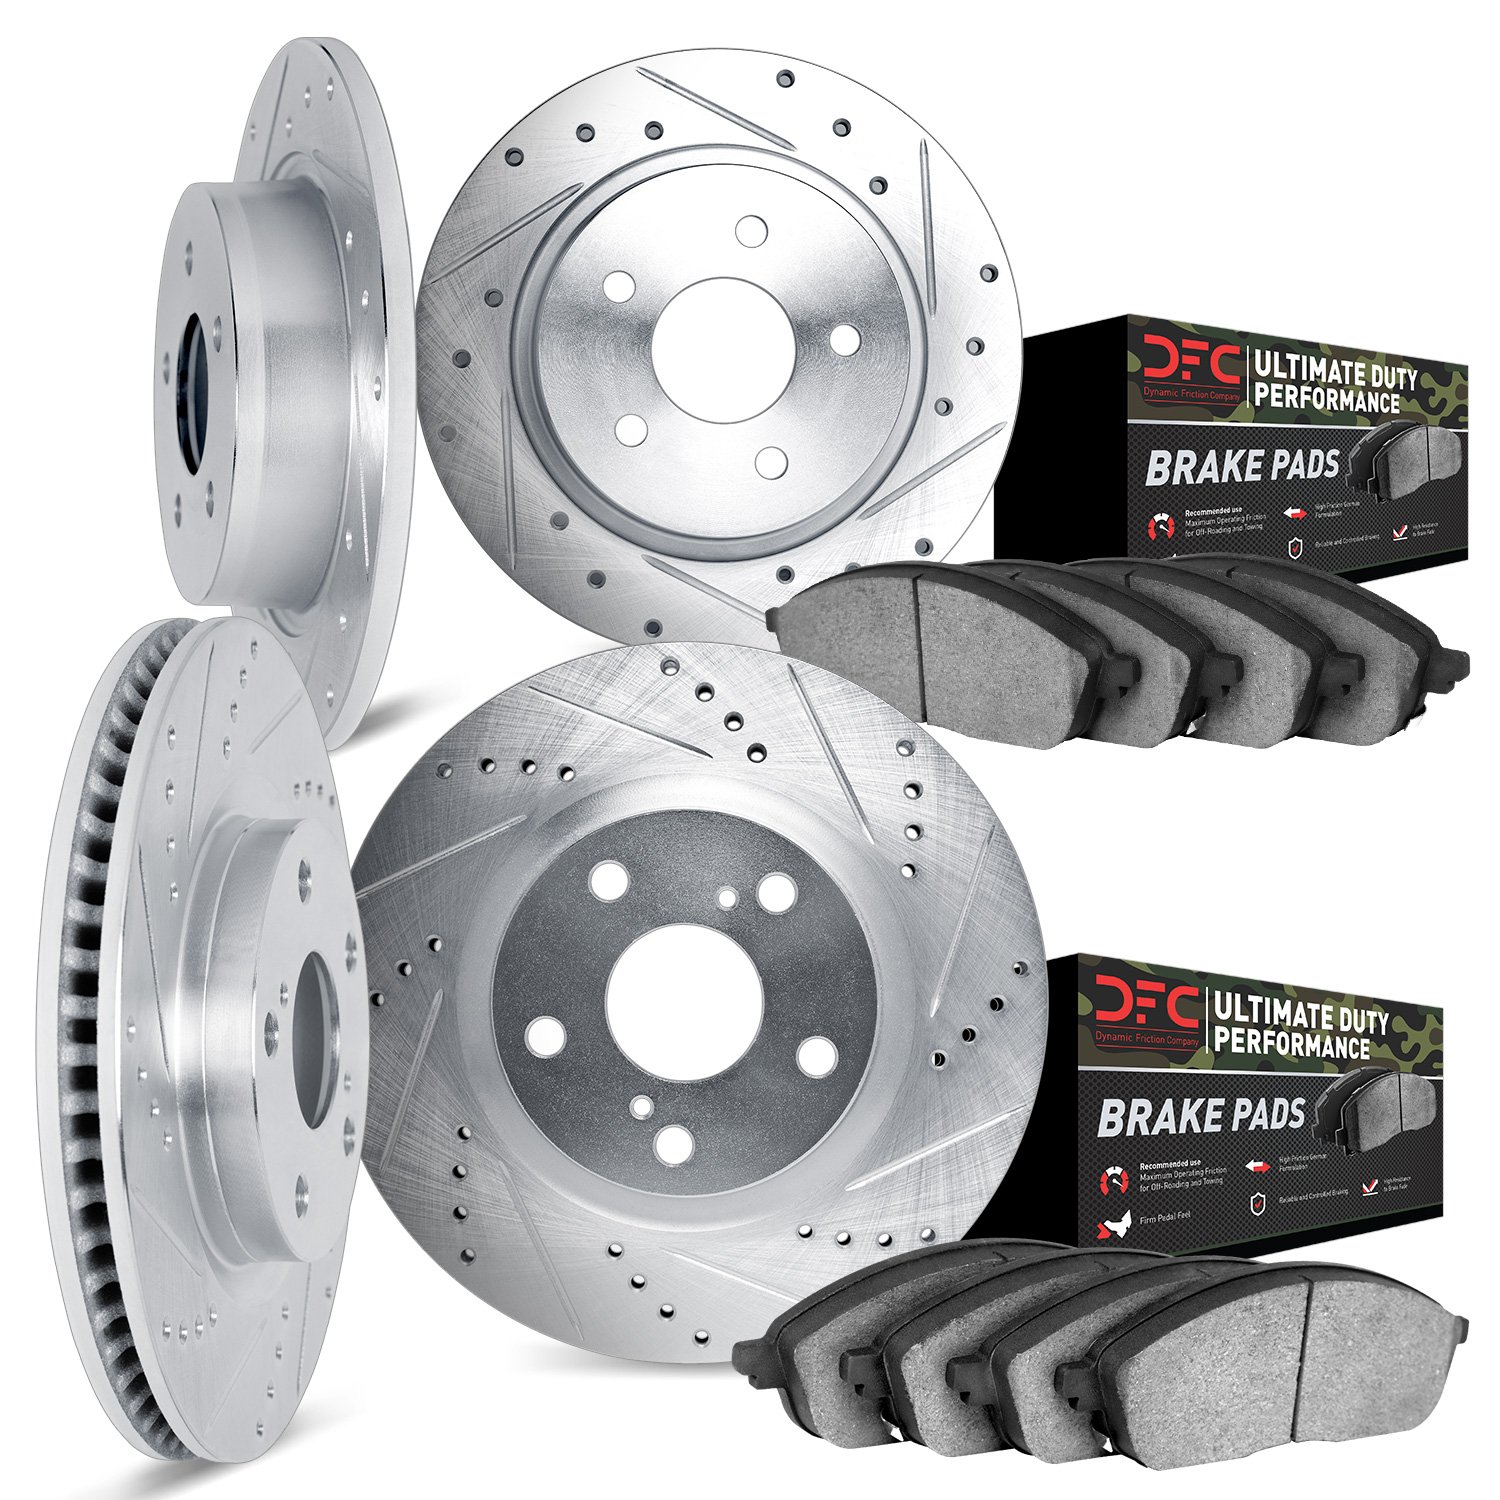 7404-42010 Drilled/Slotted Brake Rotors with Ultimate-Duty Brake Pads Kit [Silver], 2011-2012 Mopar, Position: Front and Rear